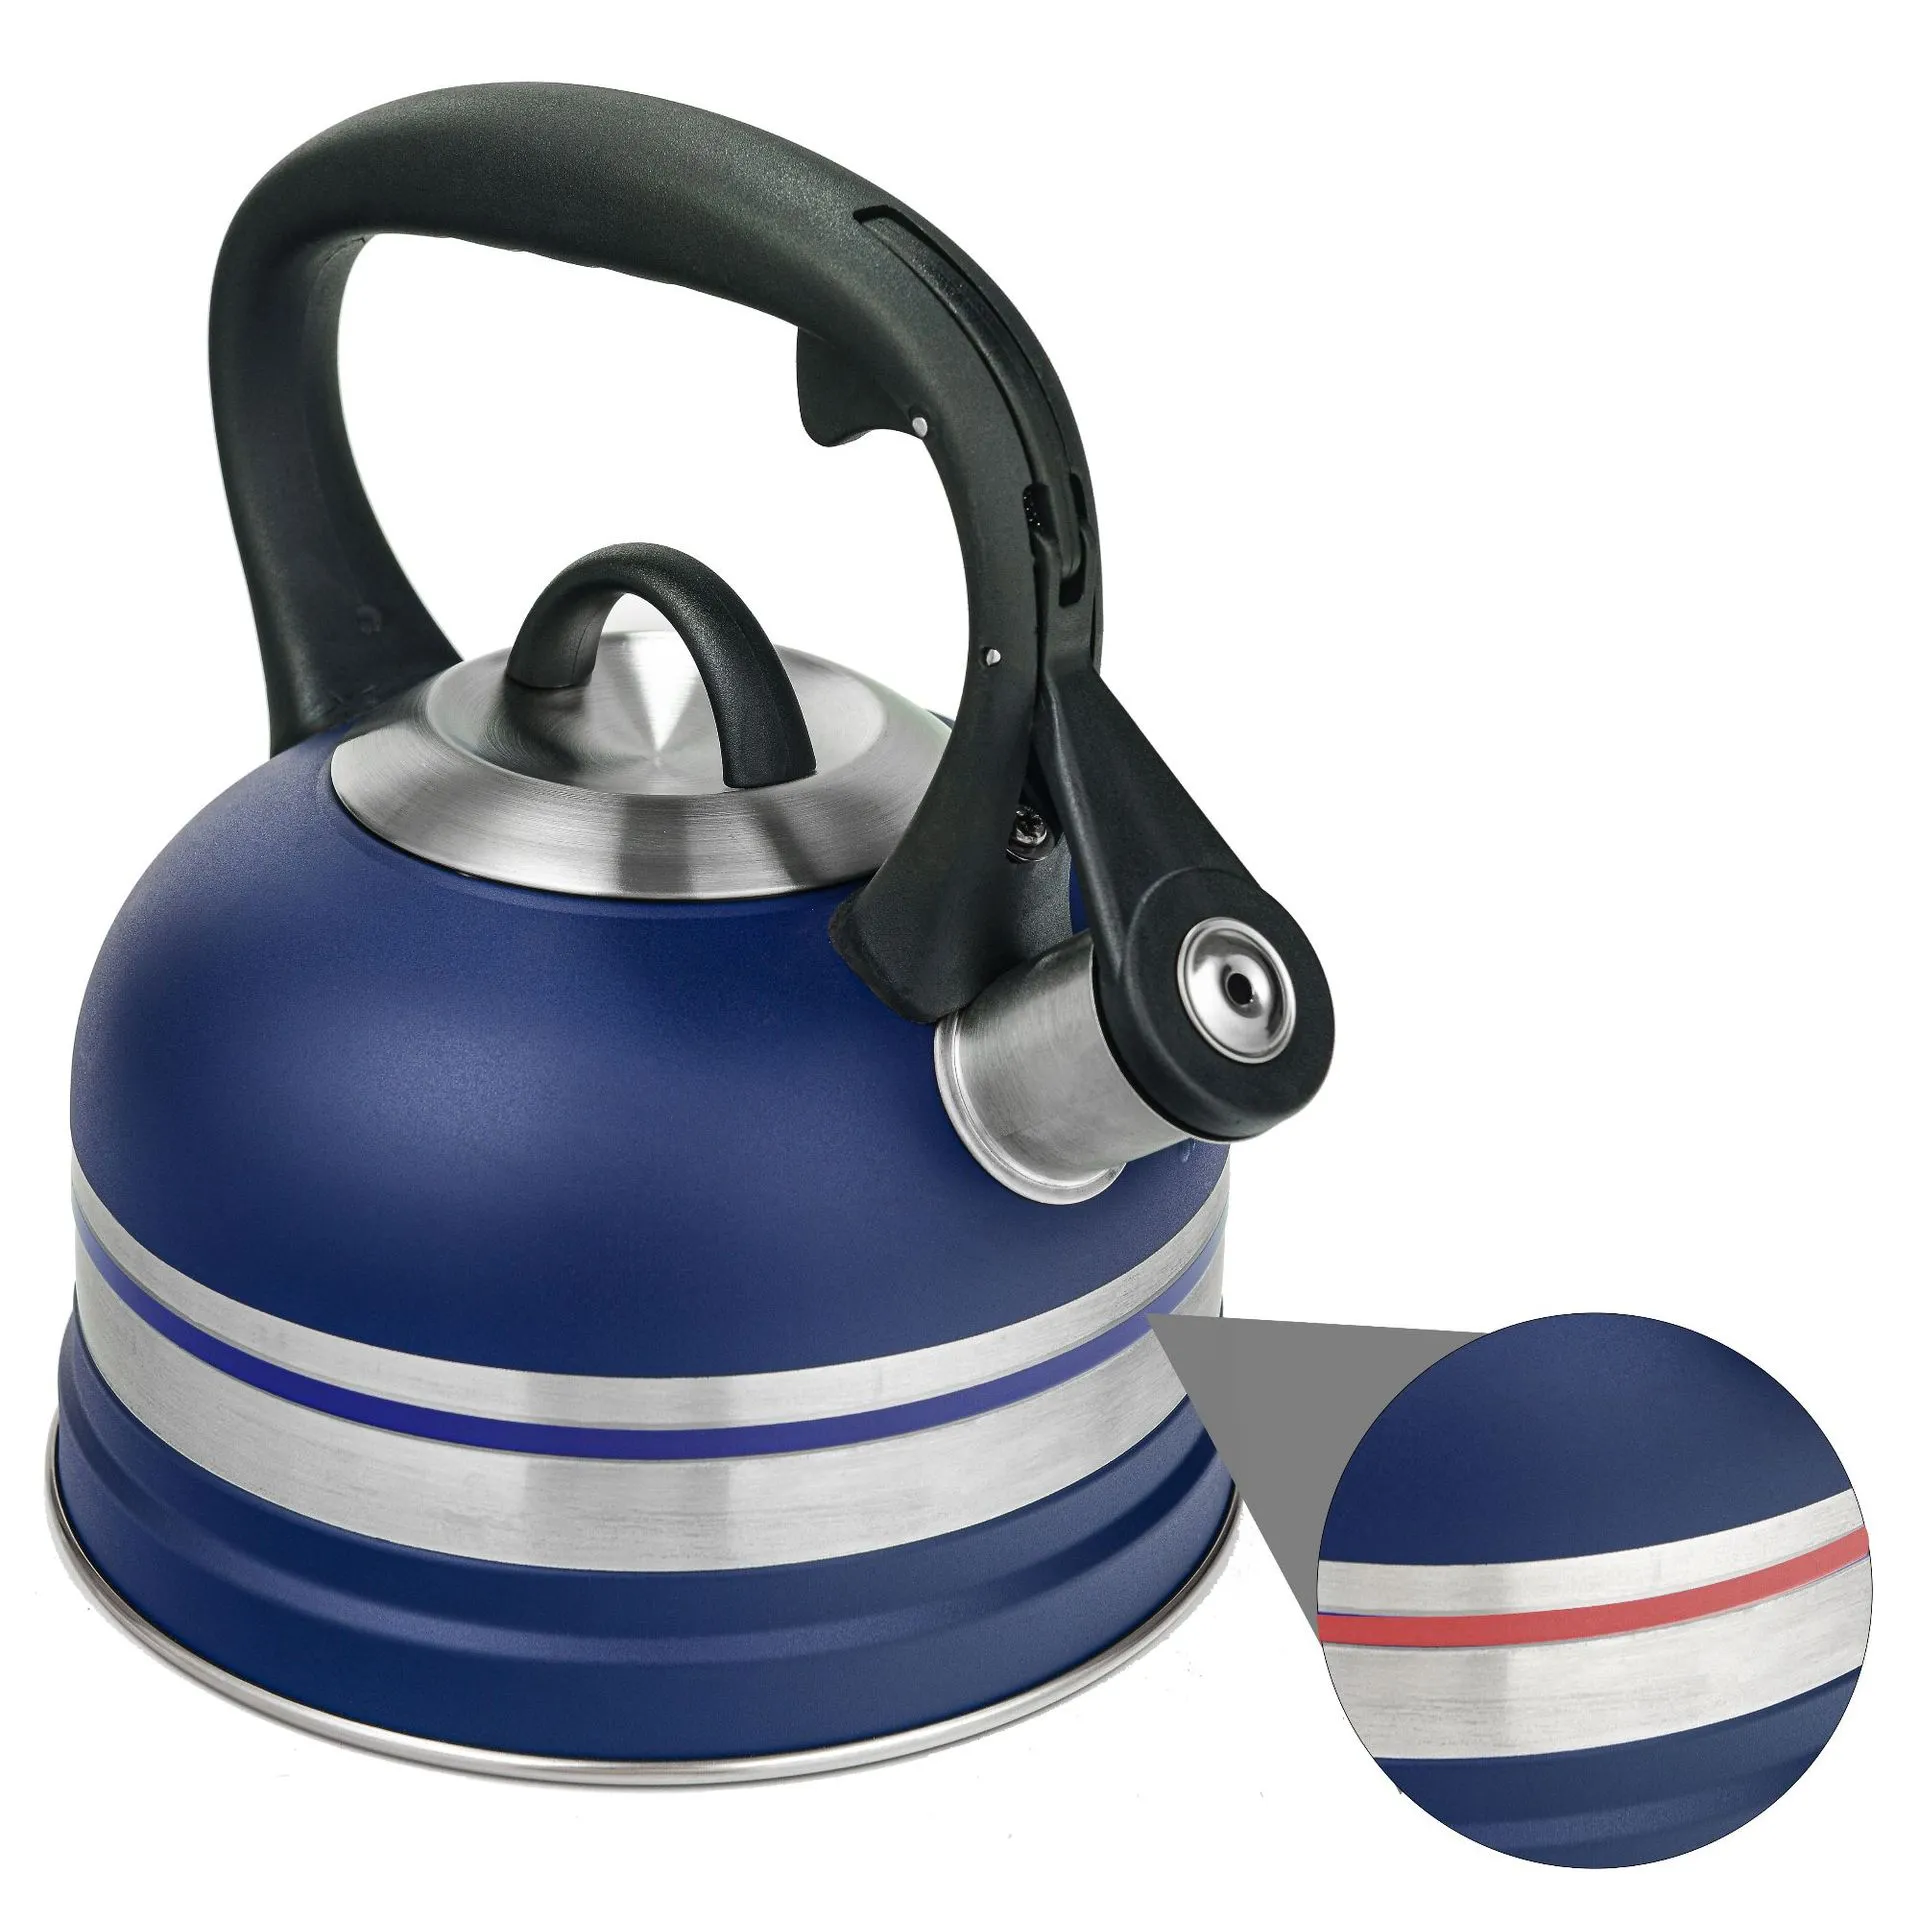 Stainless Steel Whistle Kettle Durable and High-ca...